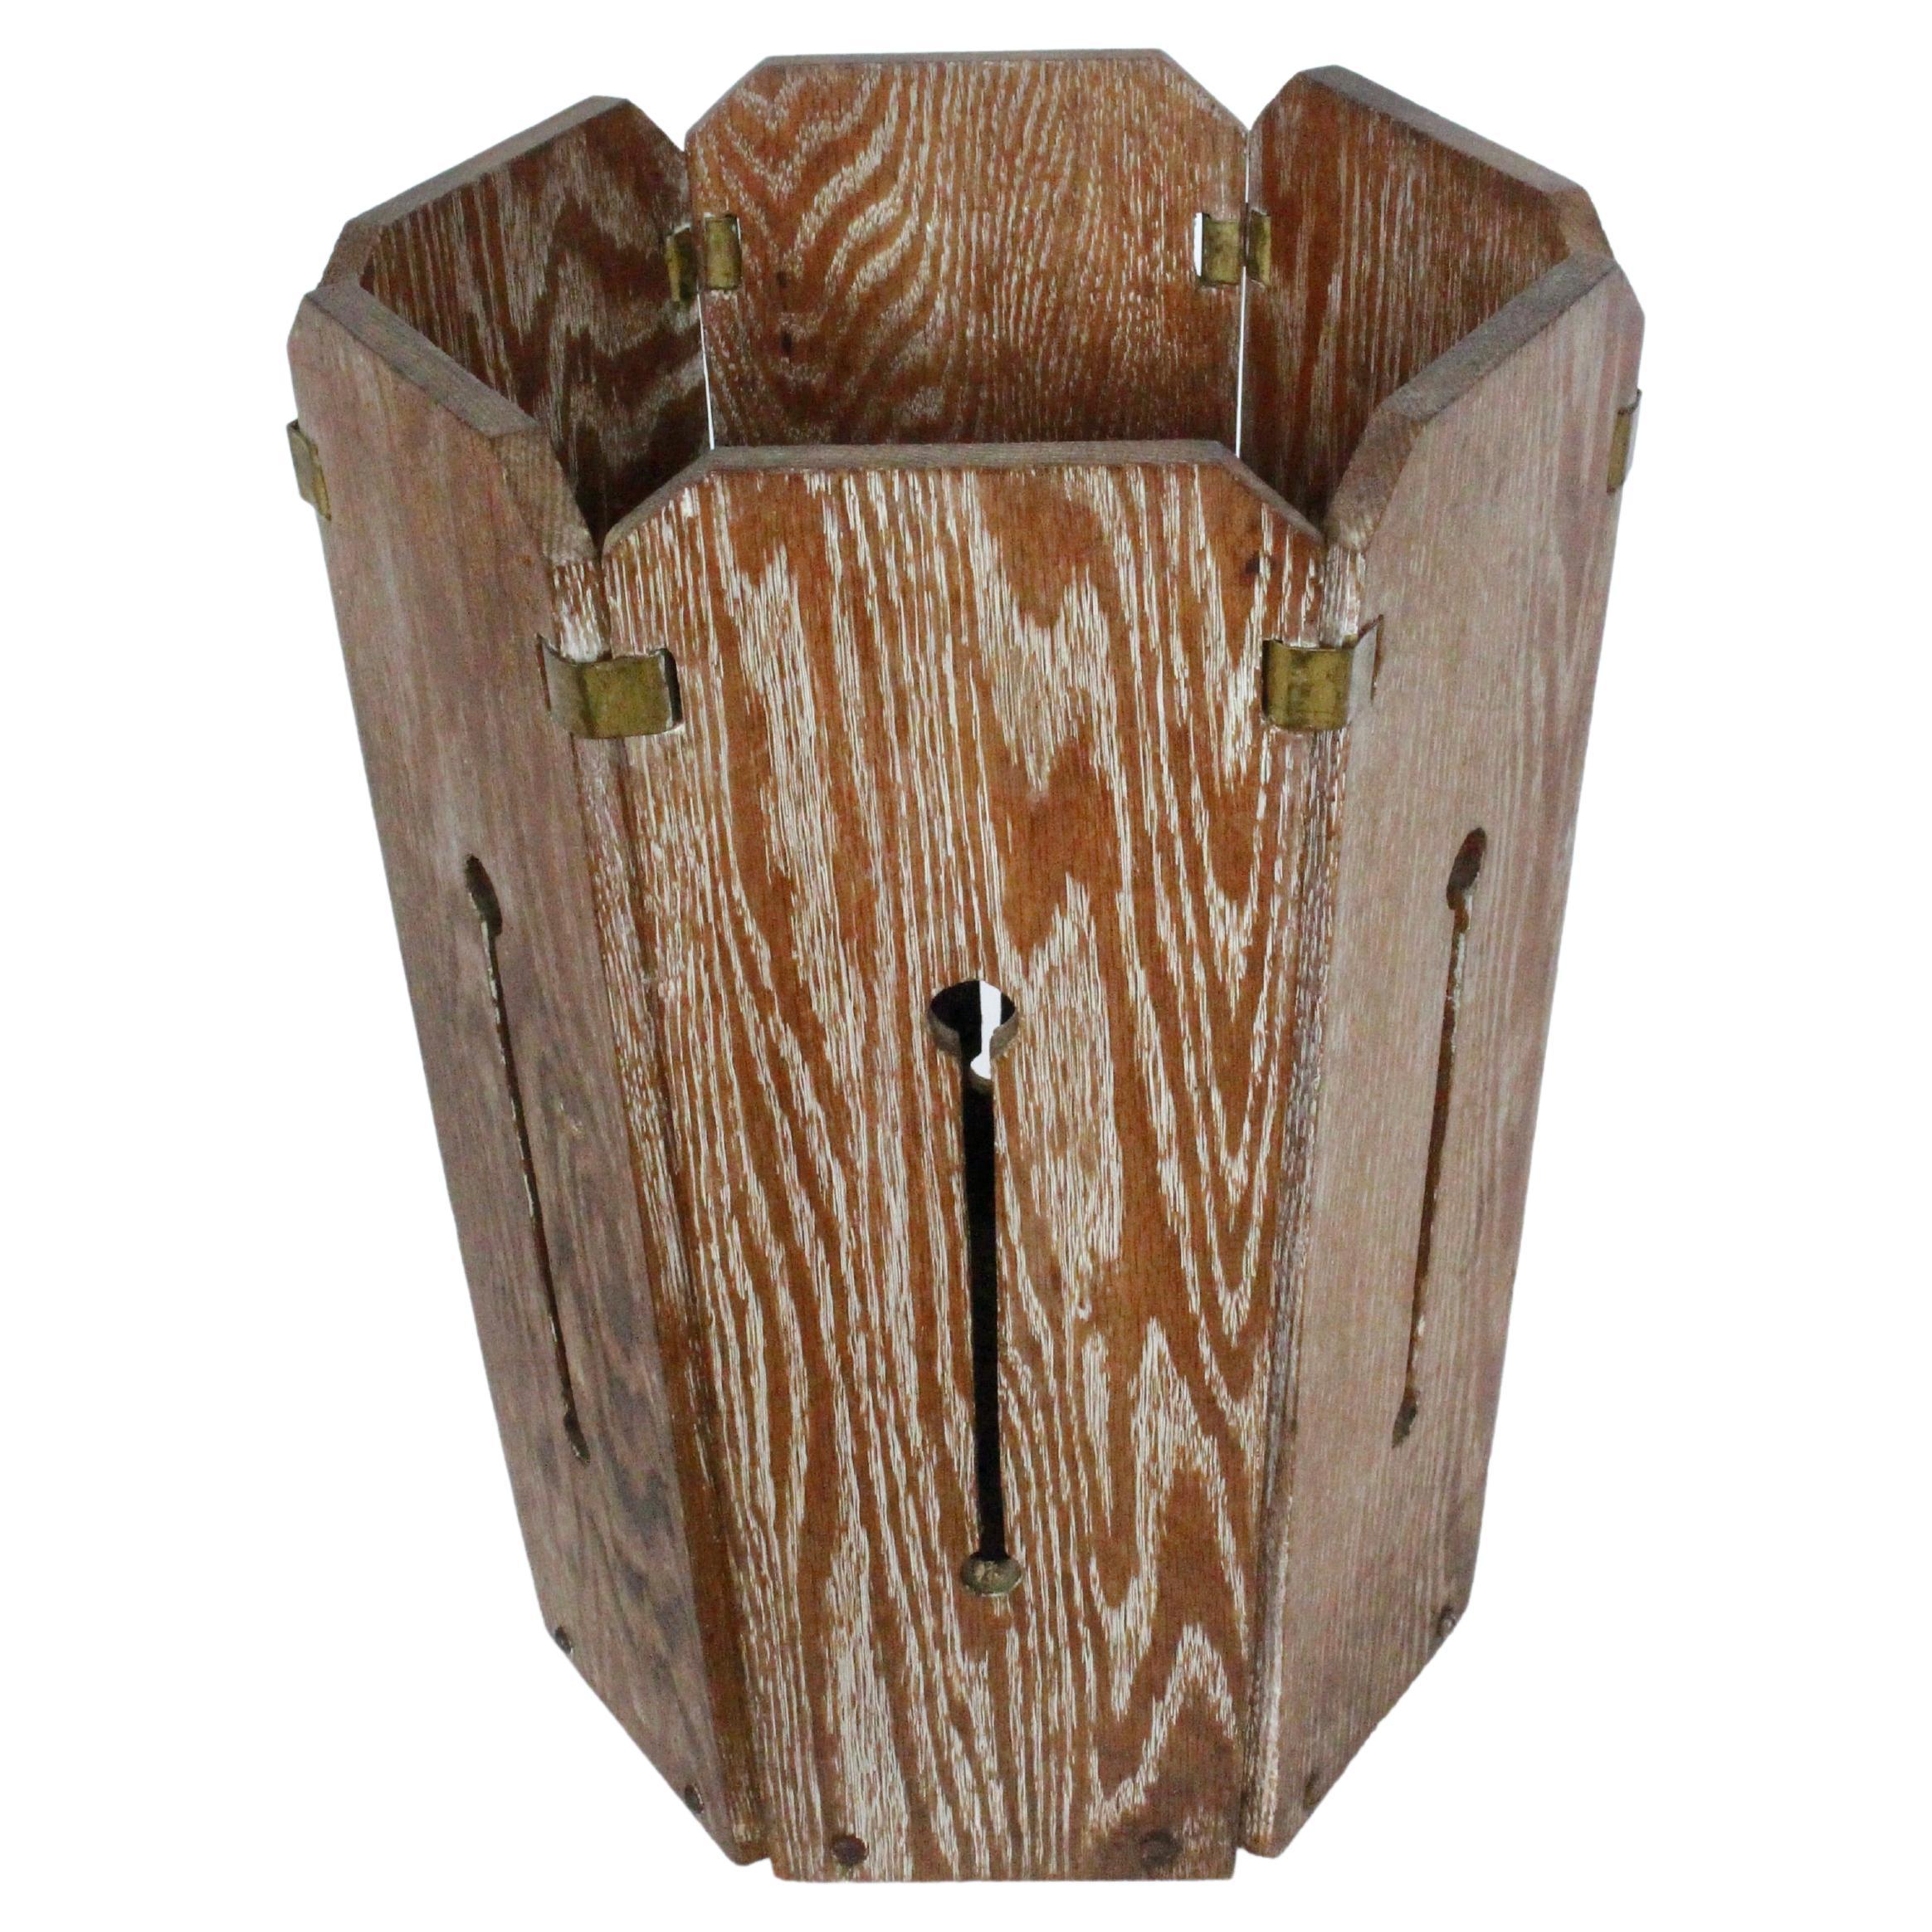 Arts & Crafts Mission Cerused Oak slat, Brass clasp hexagonal Trash Can, 1920's. Featuring a handcrafted flared form, quarter sawn oak slat construction, stick and ball cut out ,silhouette detail, with Brass clips to top and screws to lower and